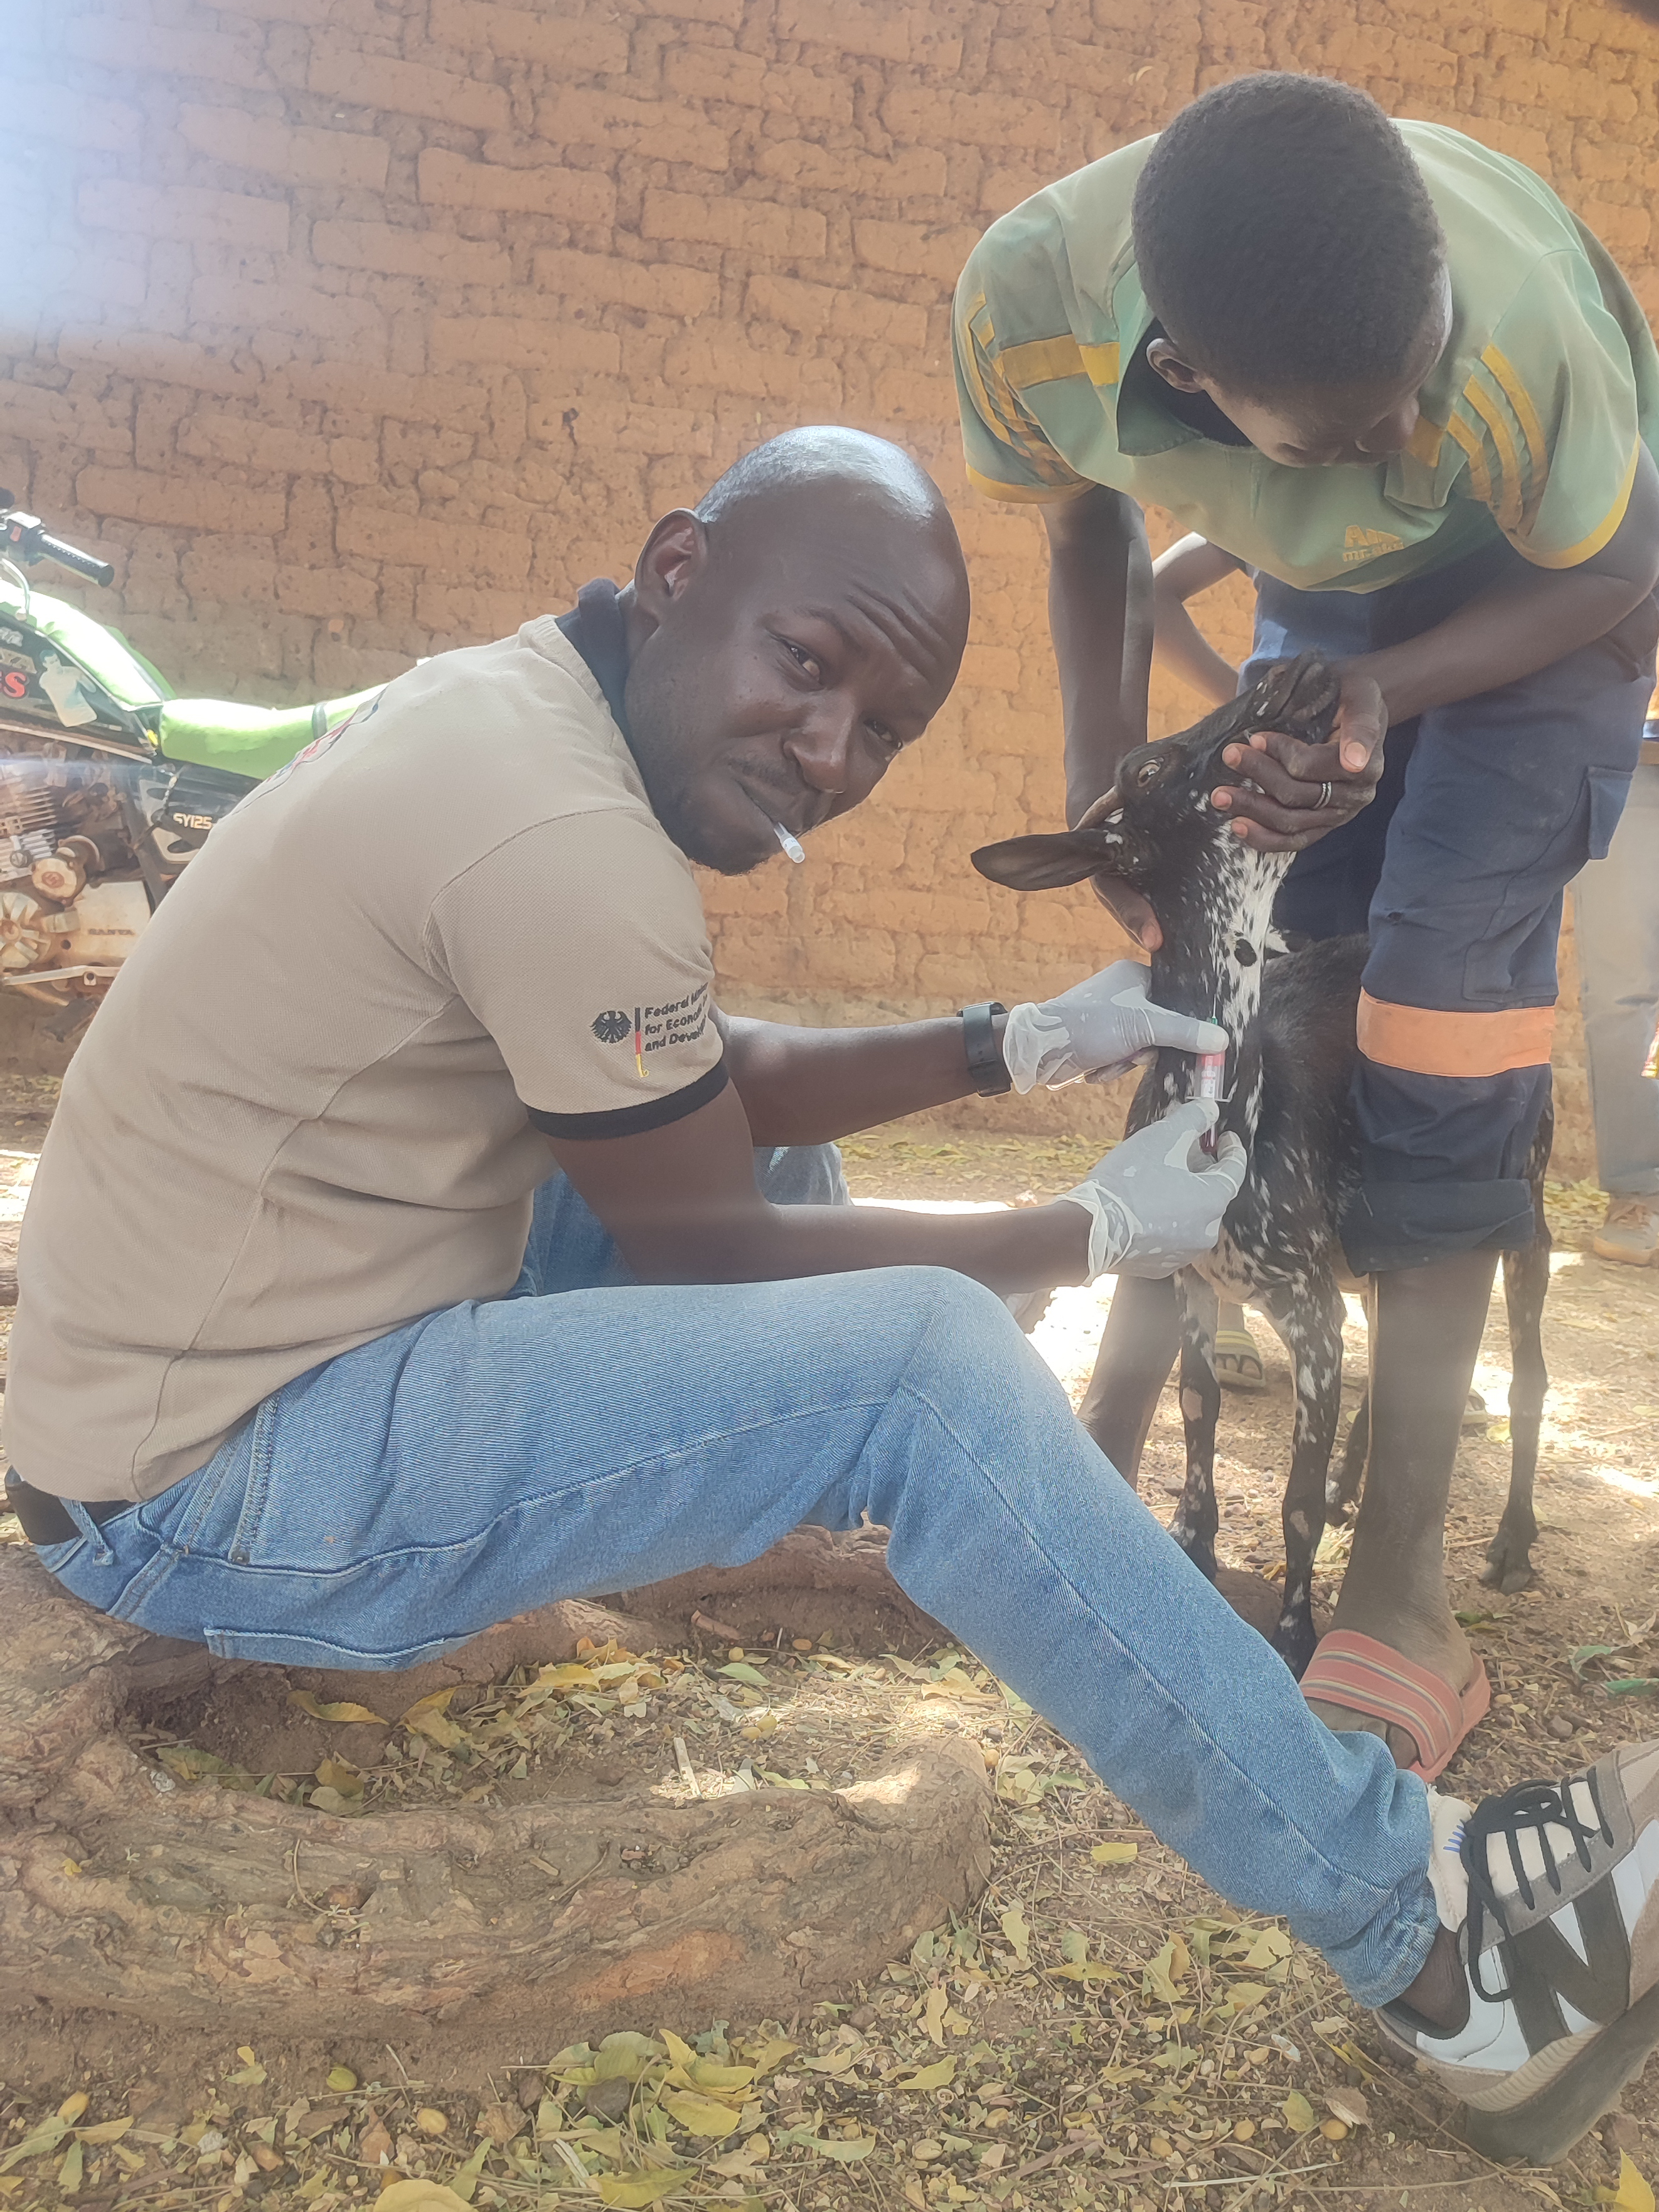 Abdoul Iboudo of ILRI takes a blood sample from a goat in Burkina Faso (photo credit: Moctar Yougbaré). Coordination and implementation of fieldwork using One Health 